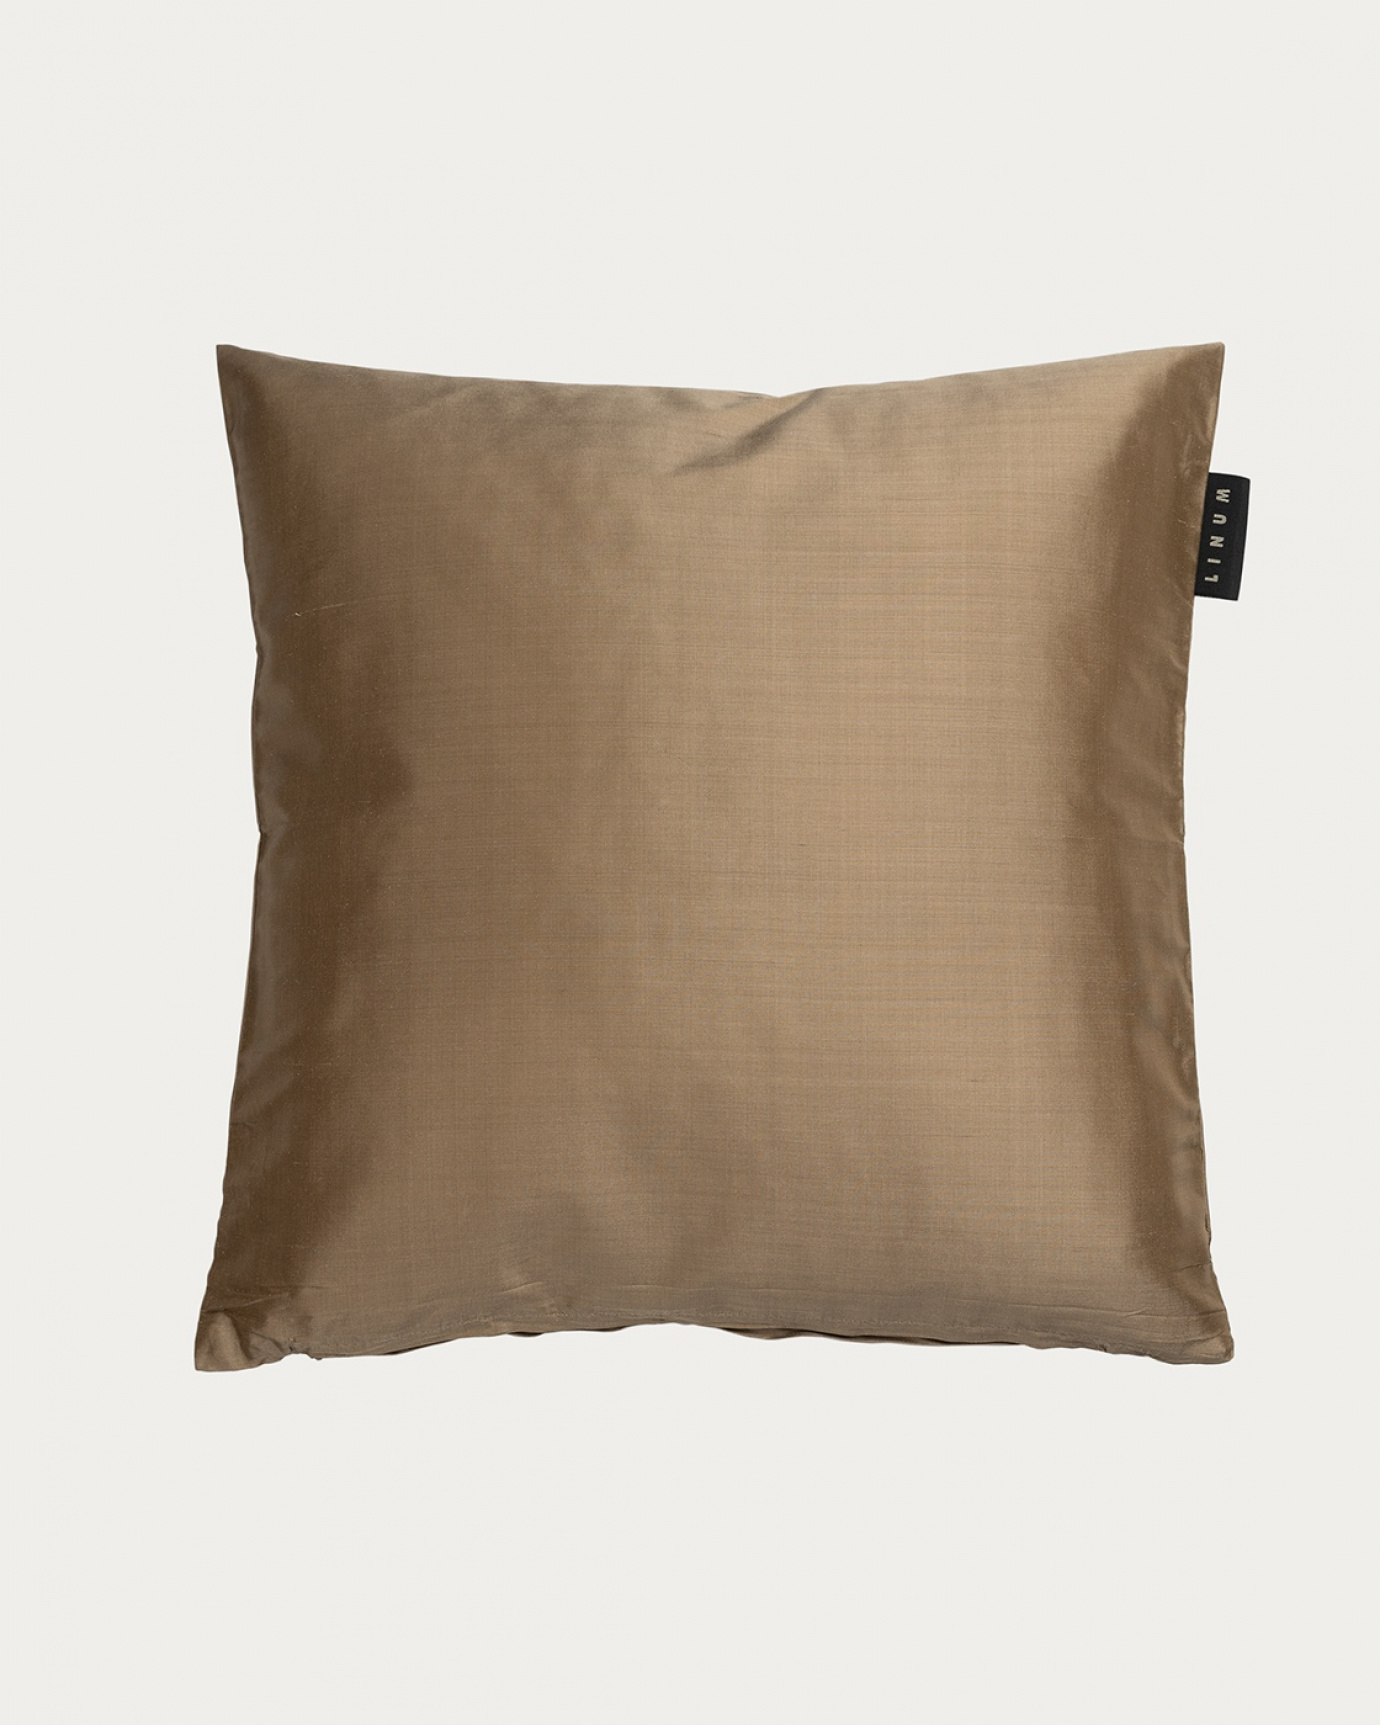 Product image smoke brown SILK cushion cover made of 100% dupion silk that gives a nice lustre from LINUM DESIGN. Size 50x50 cm.